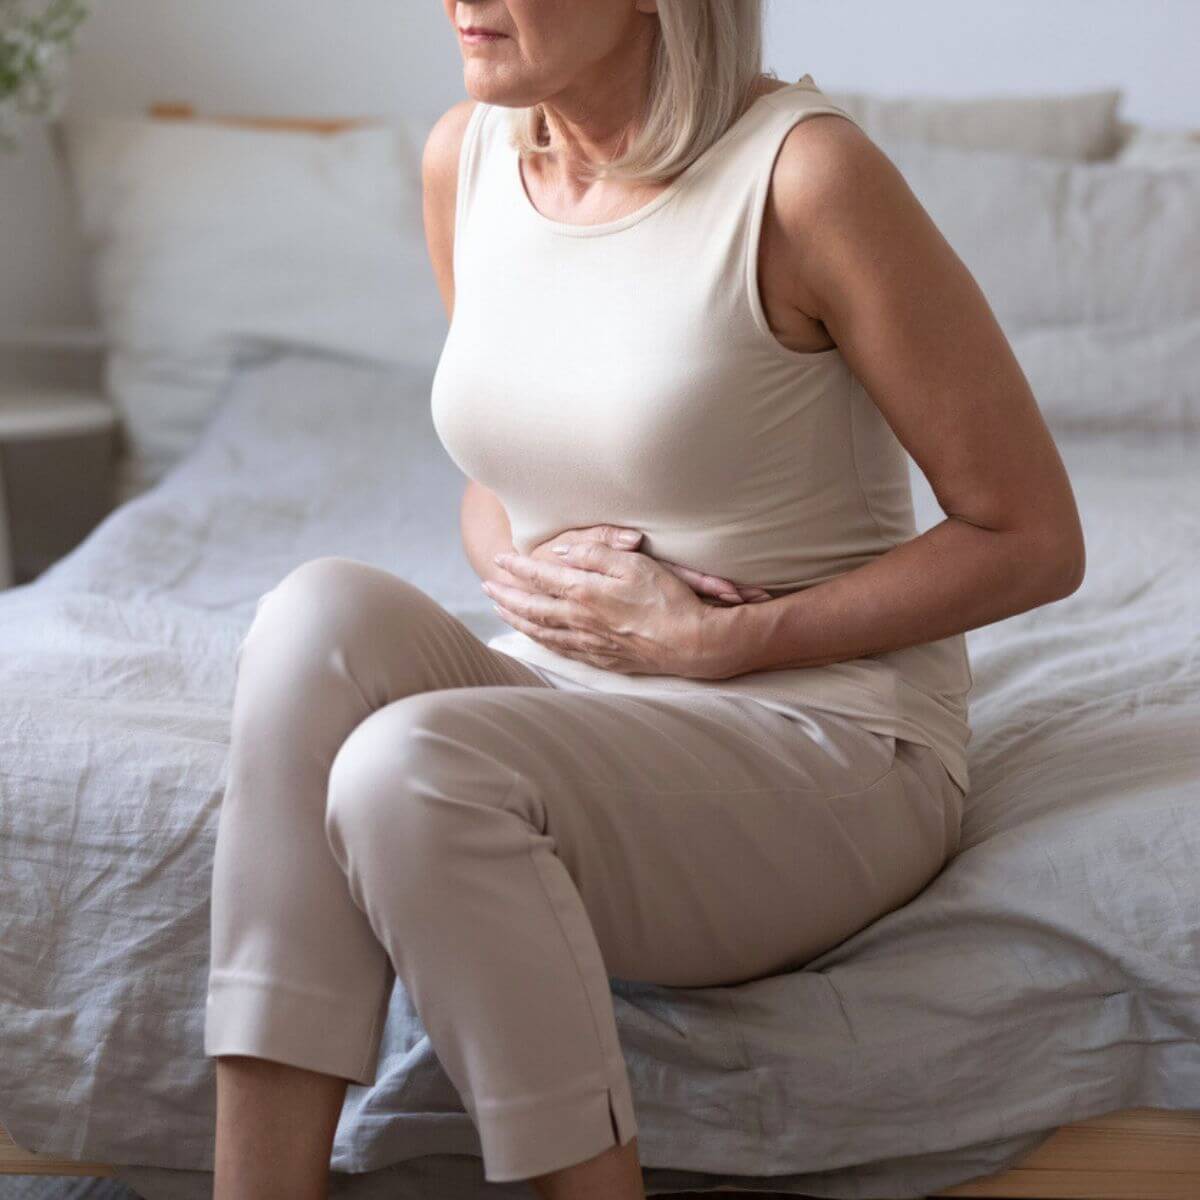 Aging woman and her gut health.